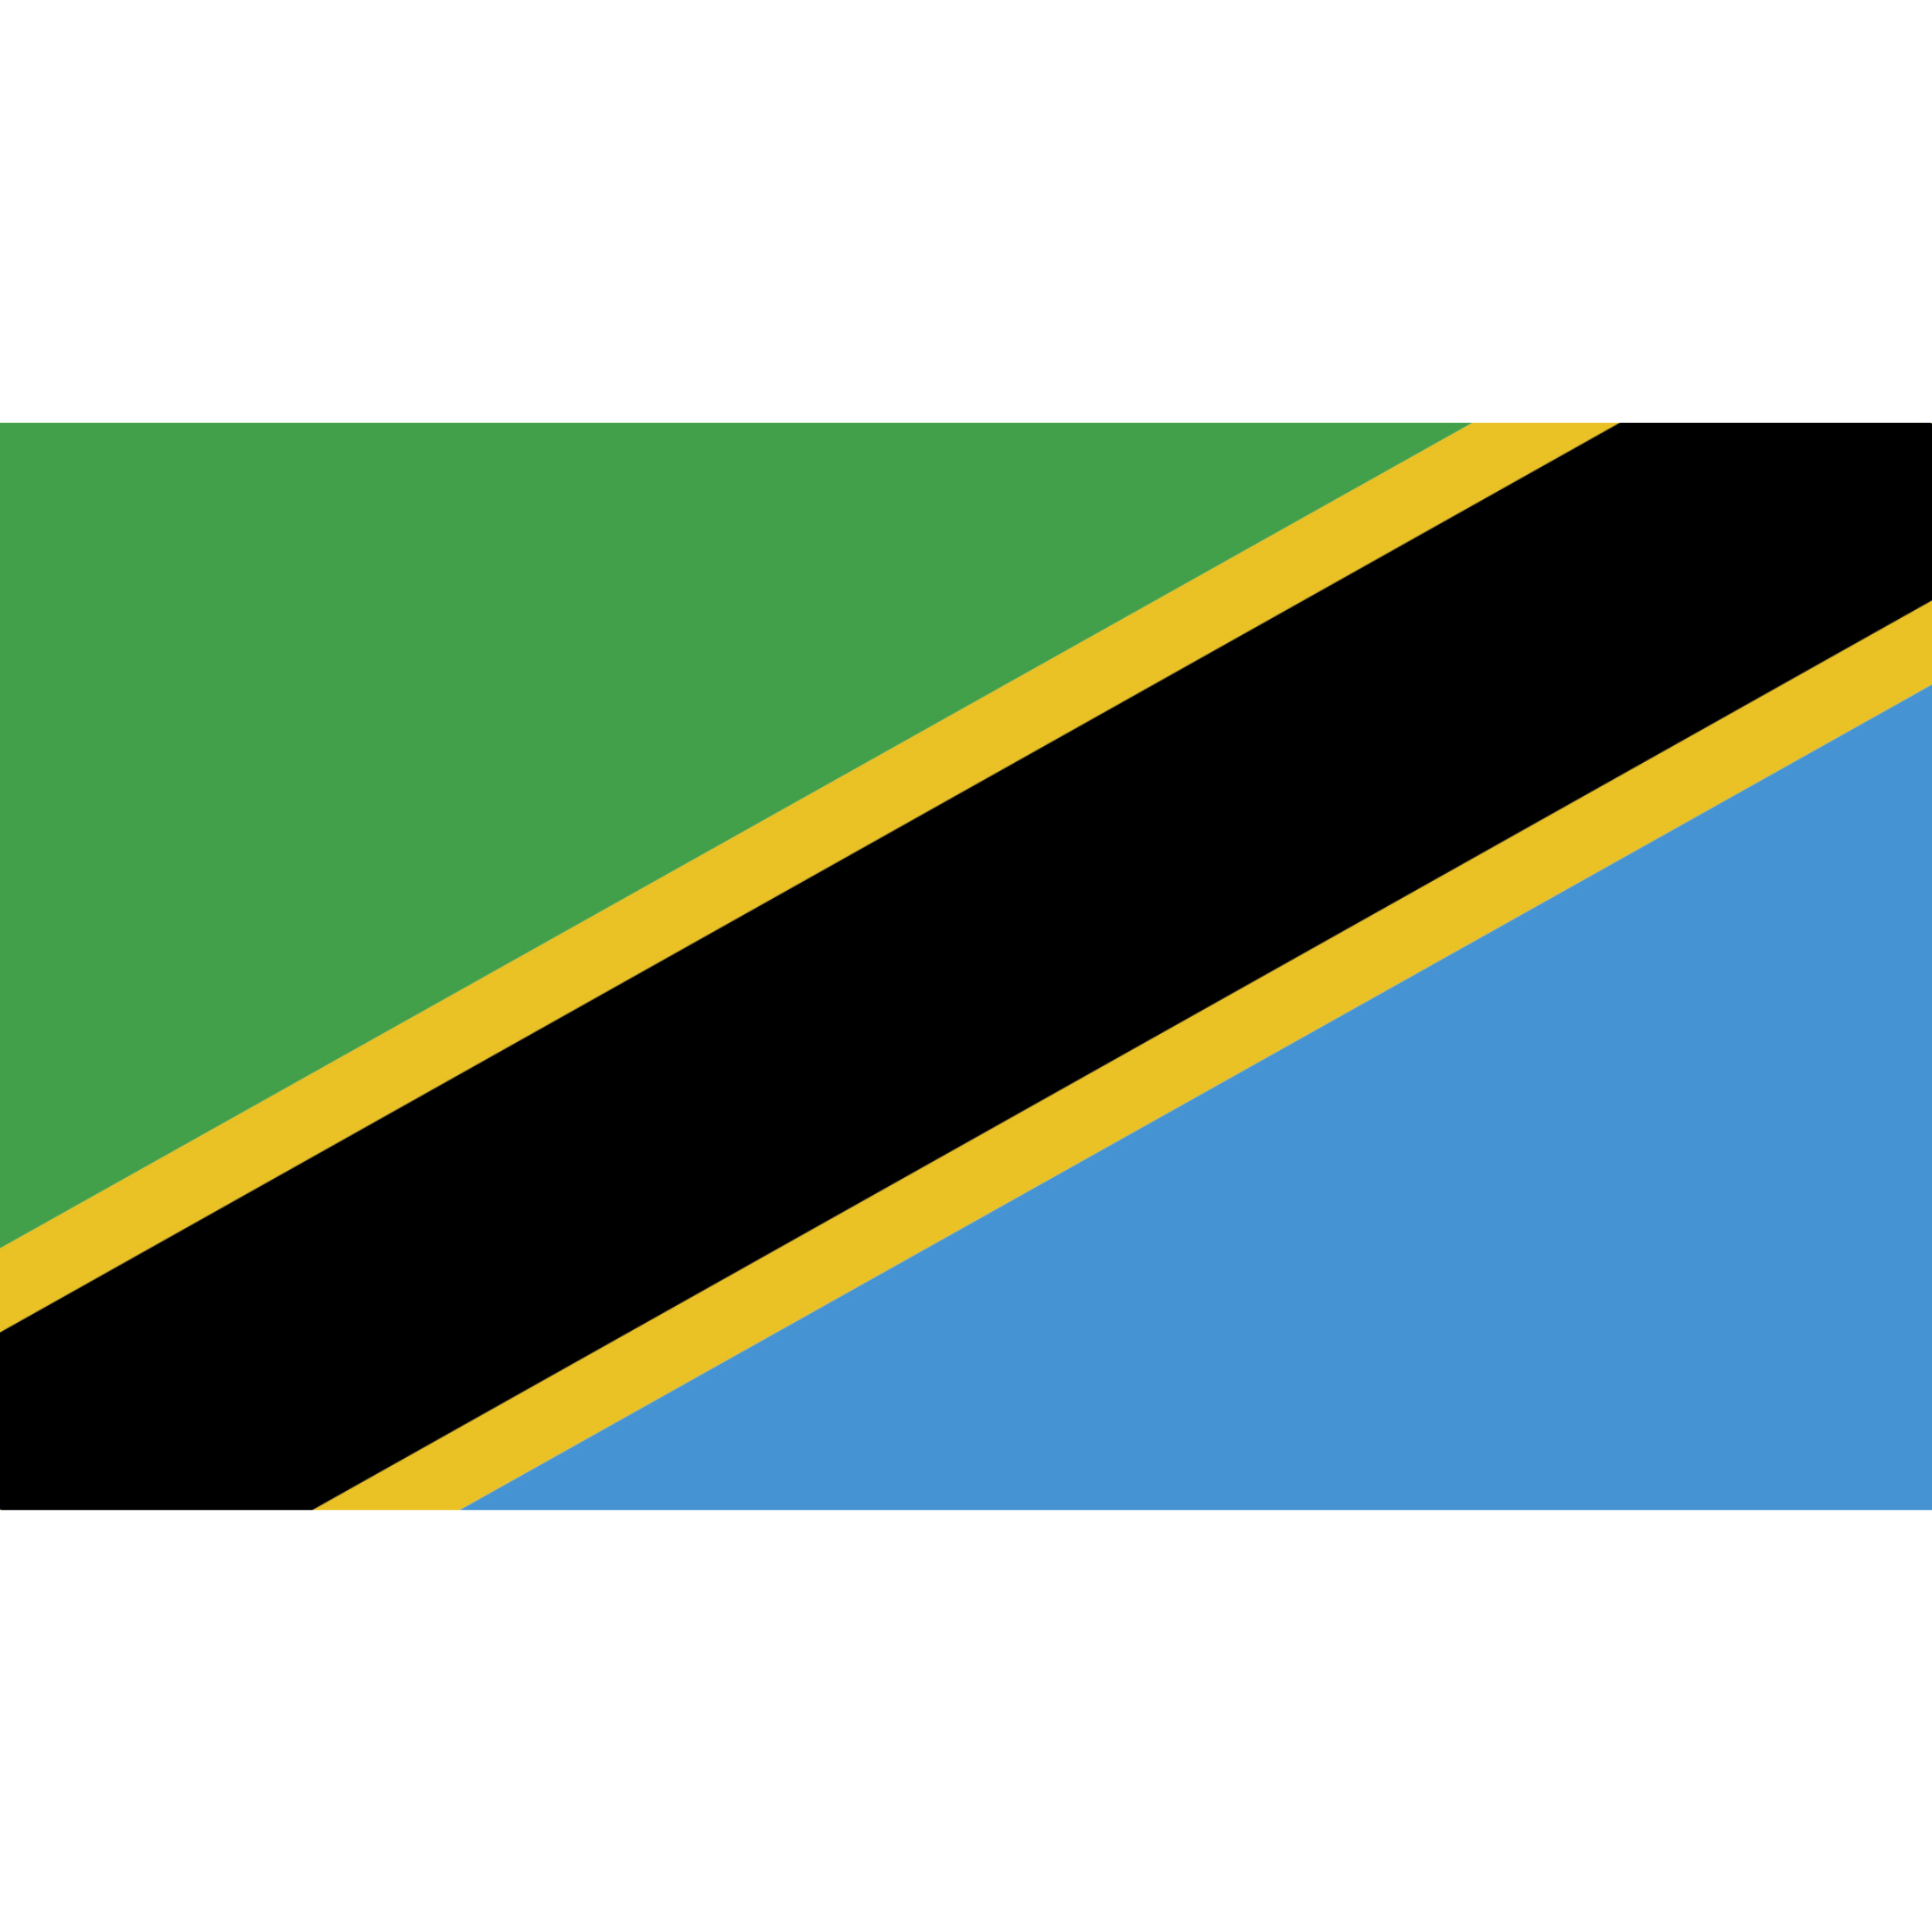 The Tanzania flag consists of a green triangle and light blue triangle separated diagonally by a yellow-edged black band.